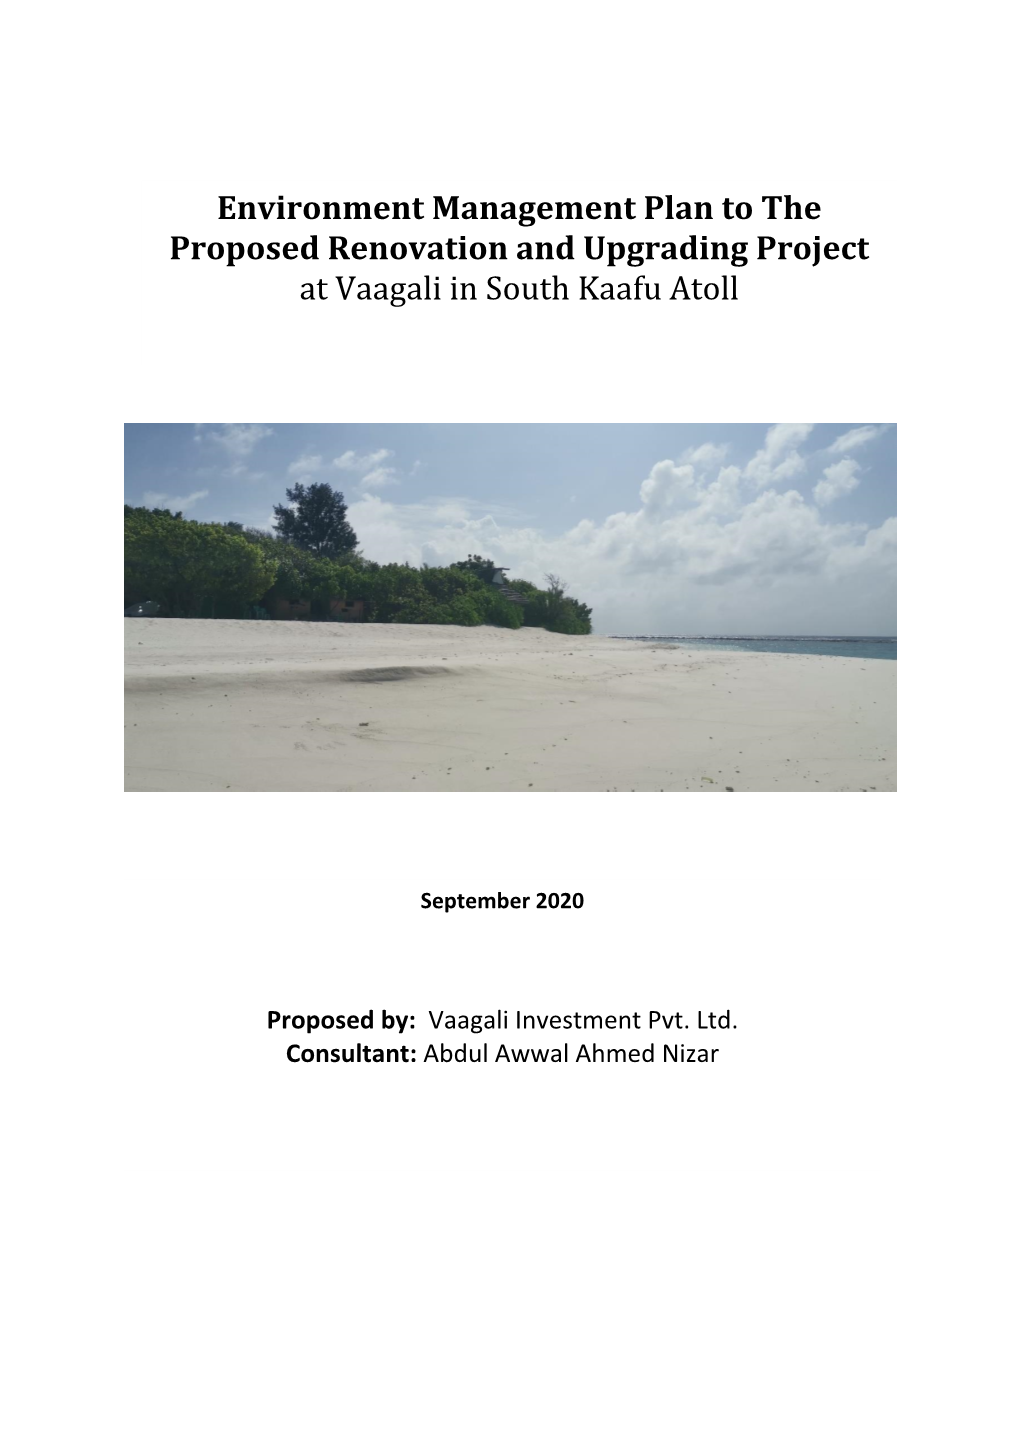 Environment Management Plan to the Proposed Renovation and Upgrading Project